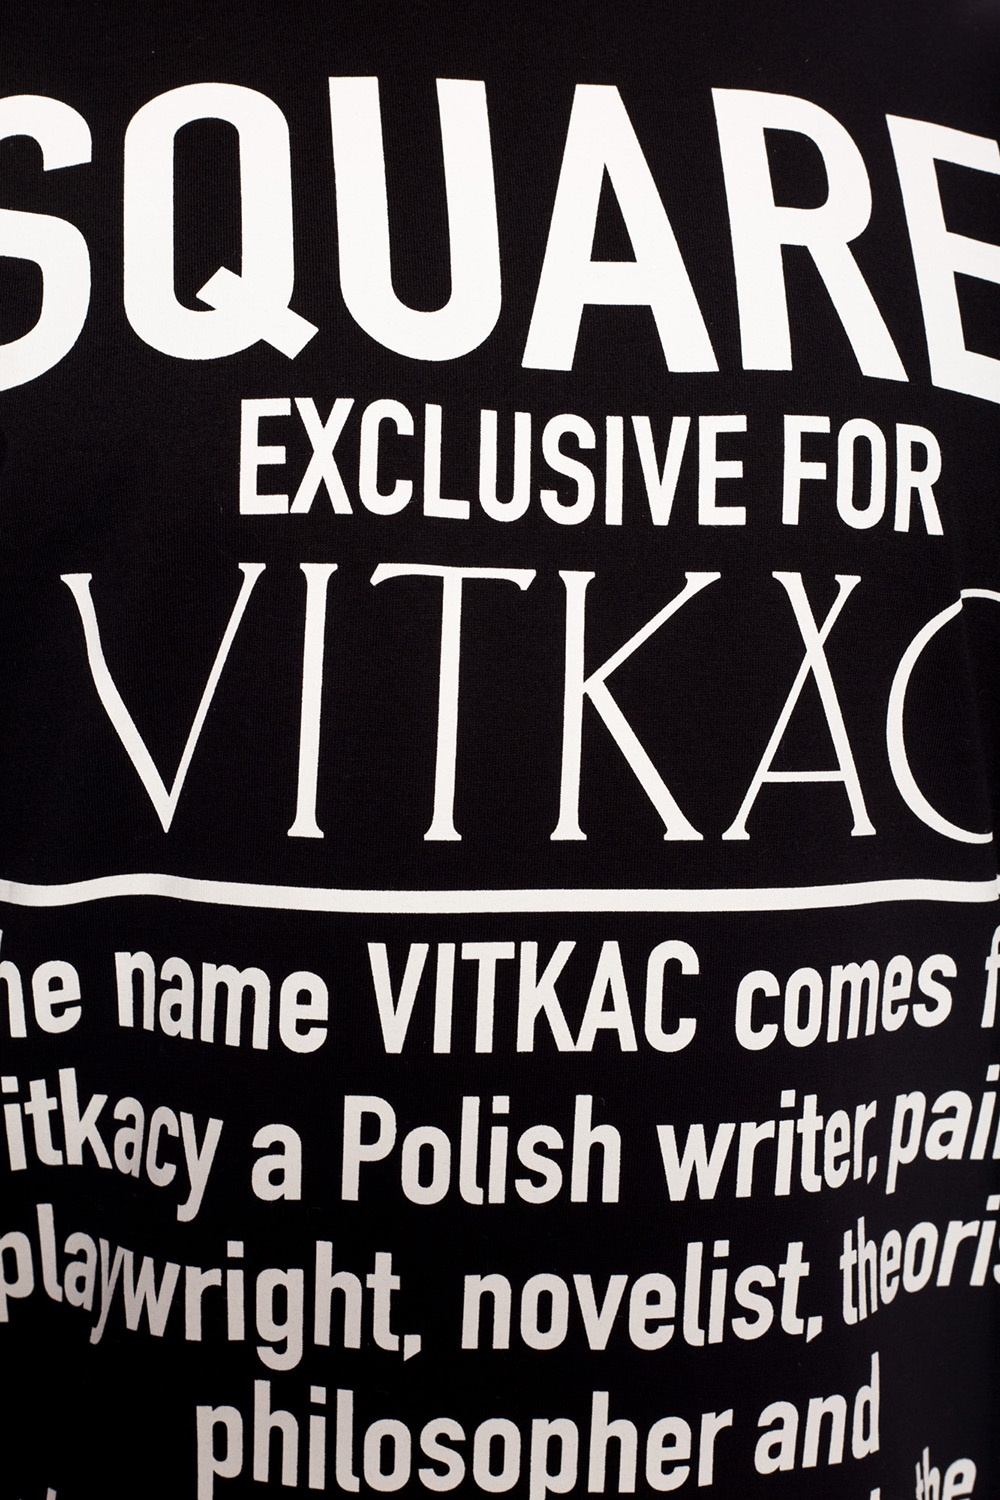 Black 'Exclusive for Vitkac' limited collection t-shirt Dsquared2